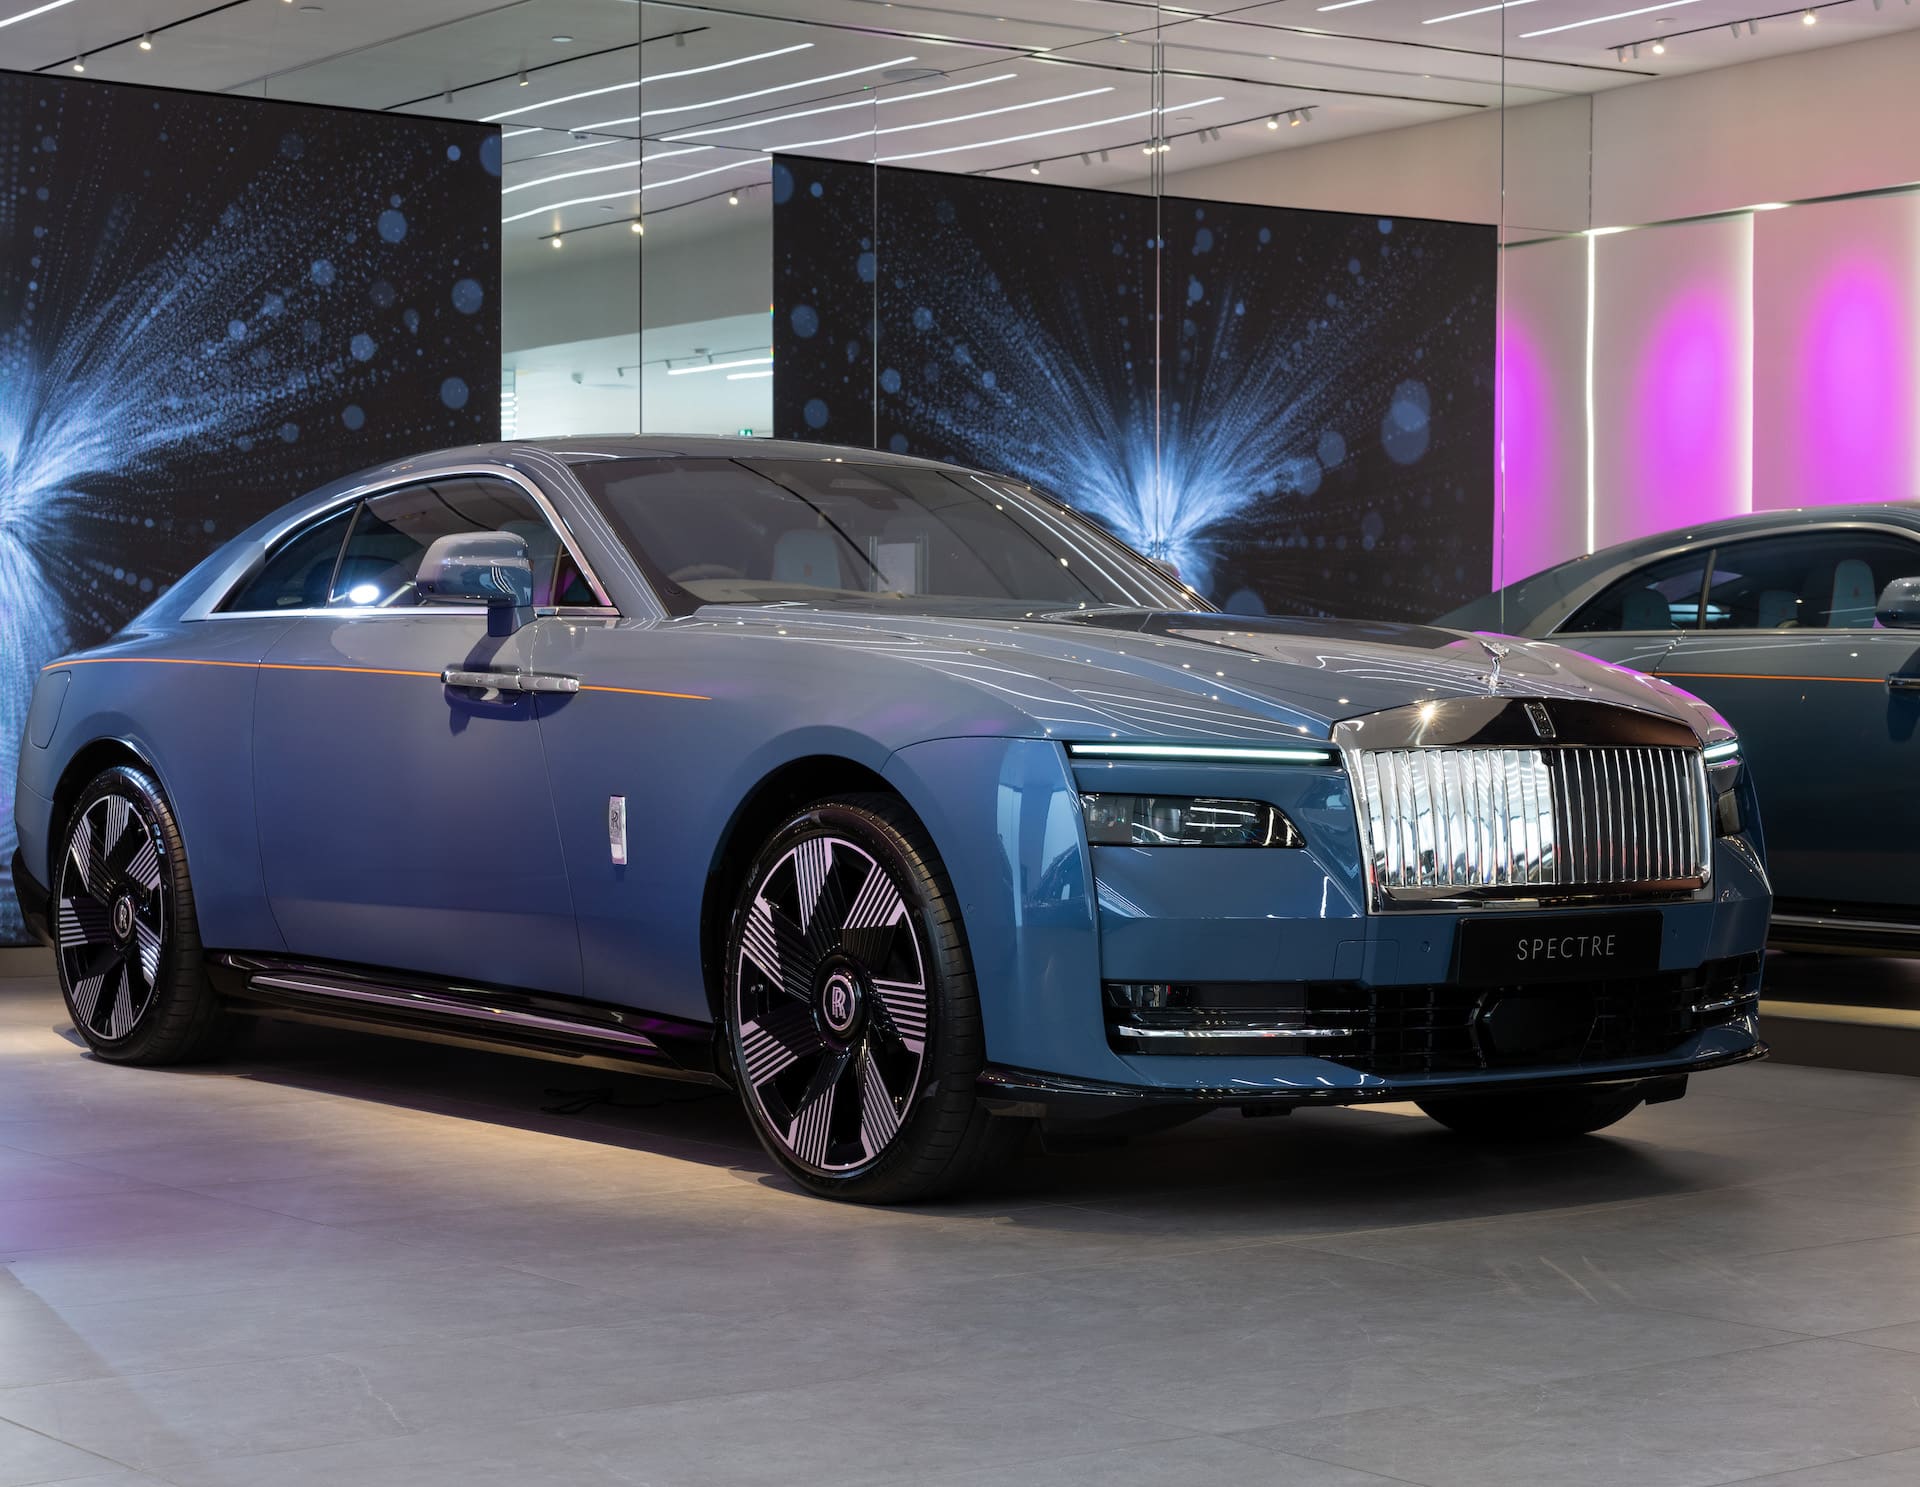 Unveiling Of Rolls Royce Spectre Marks The Dawn Of A New Electric Era In The Uk The Ev Report